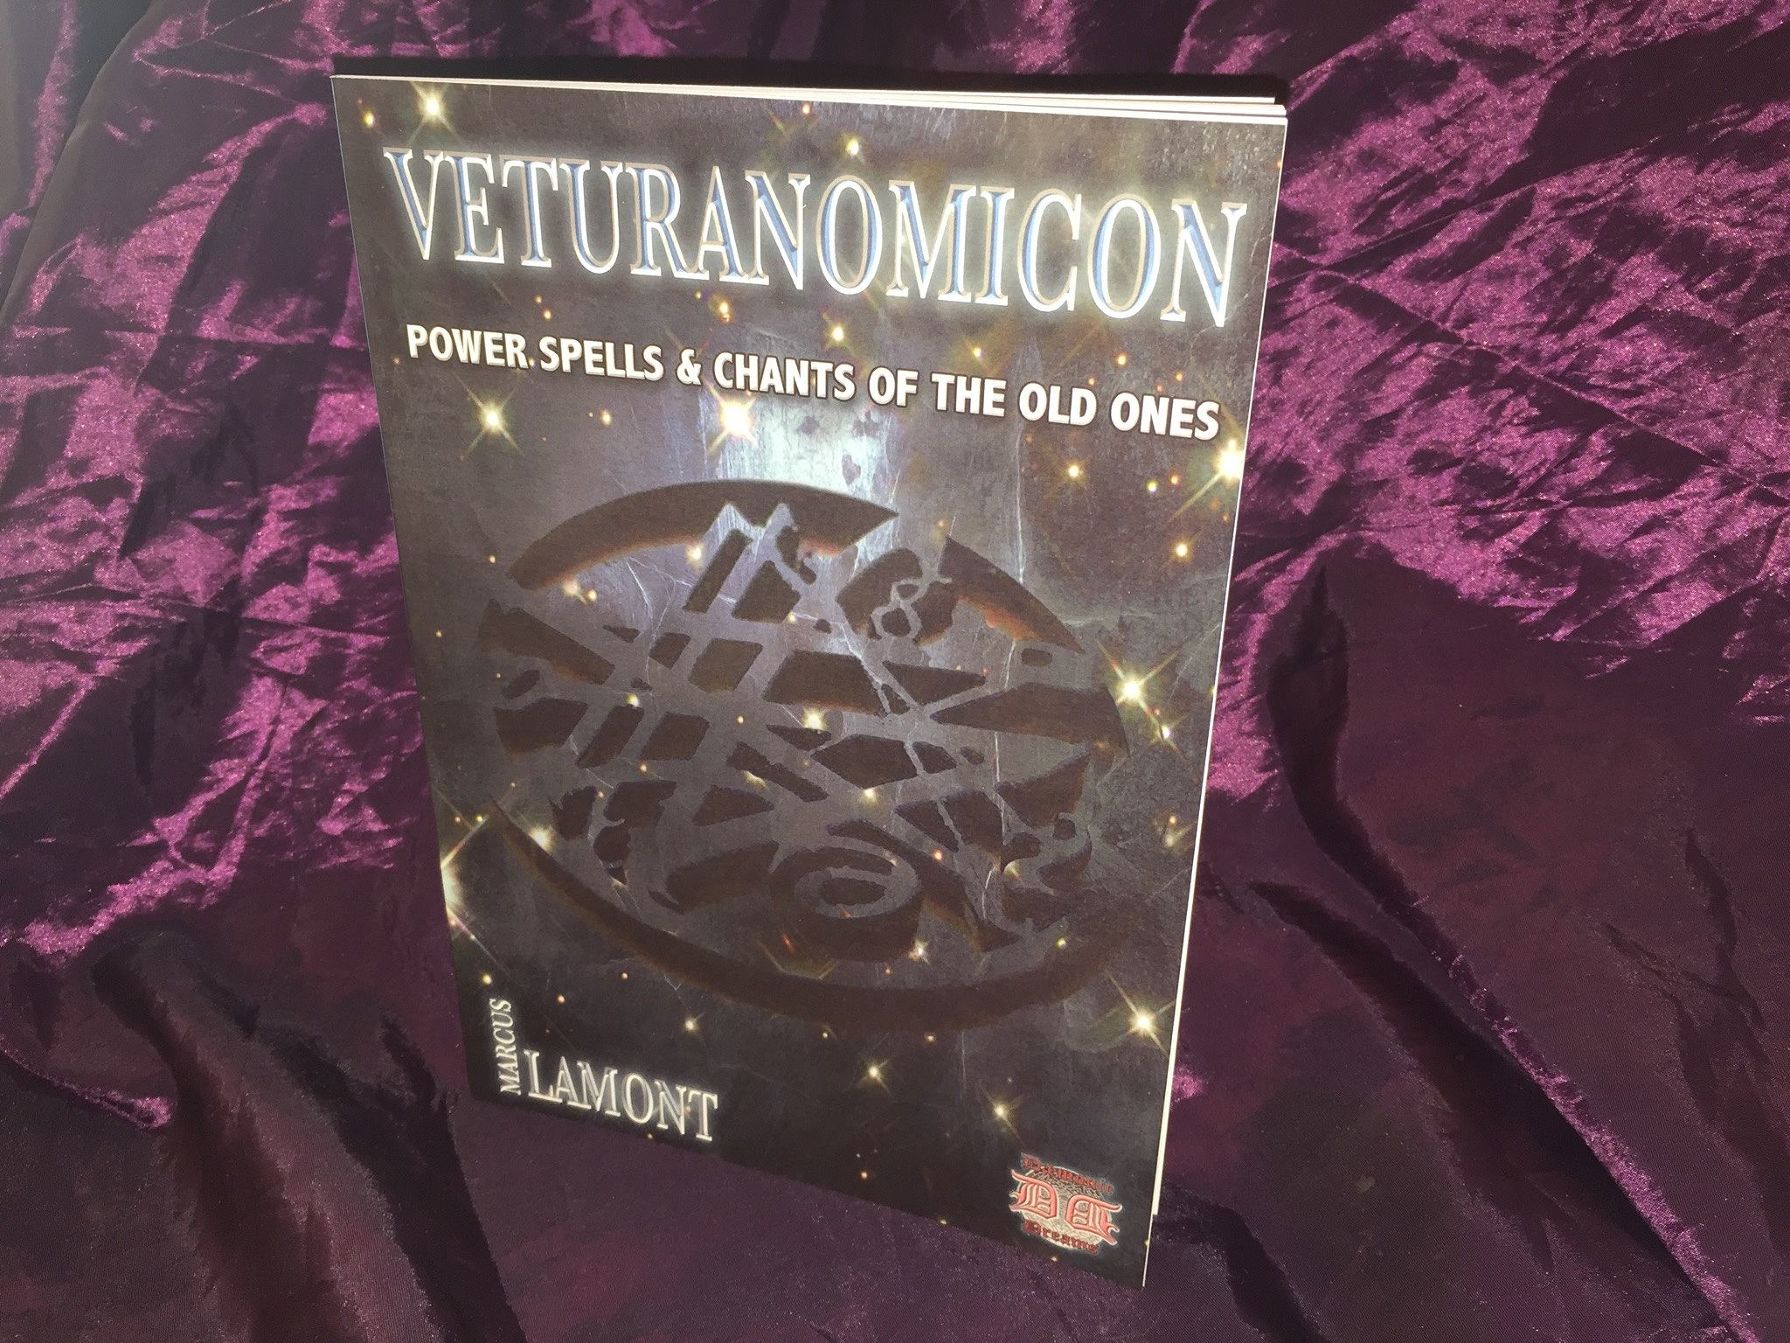 THE VETURANOMICON By MARCUS LAMONT